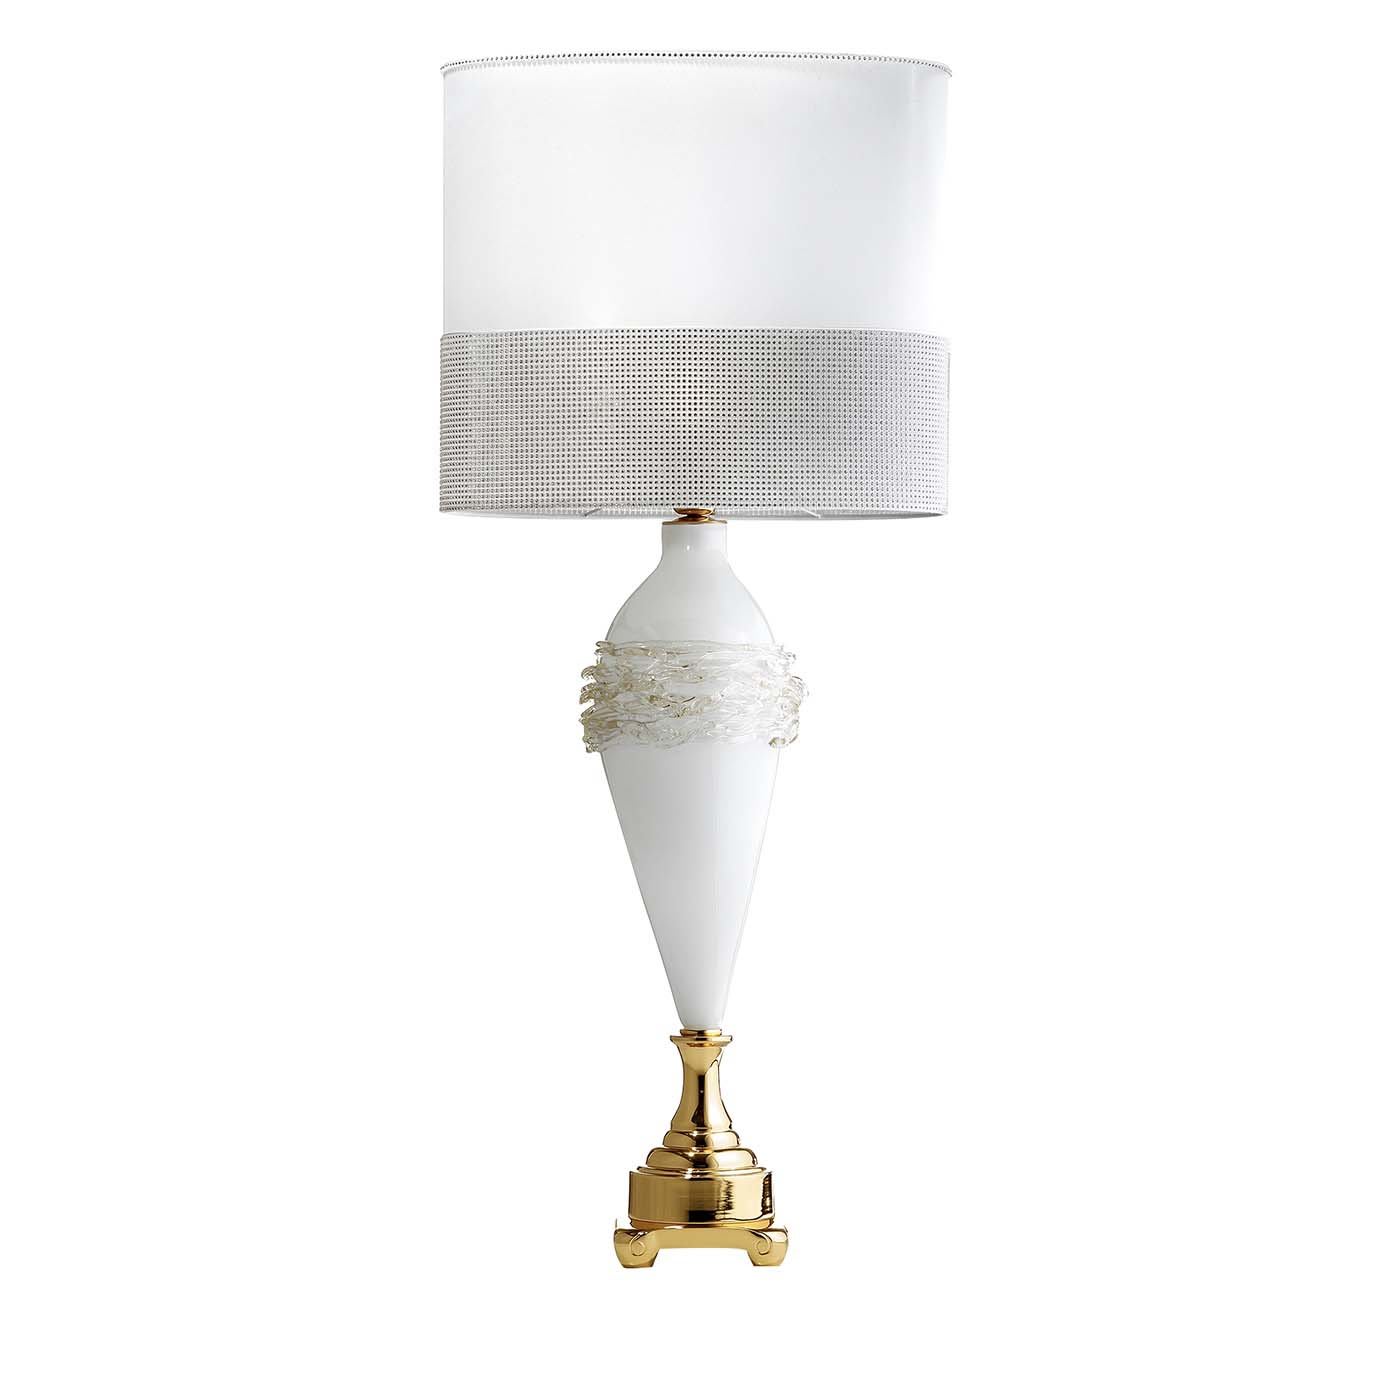 G-Gold Threads Table Lamp - Il Paralume Marina